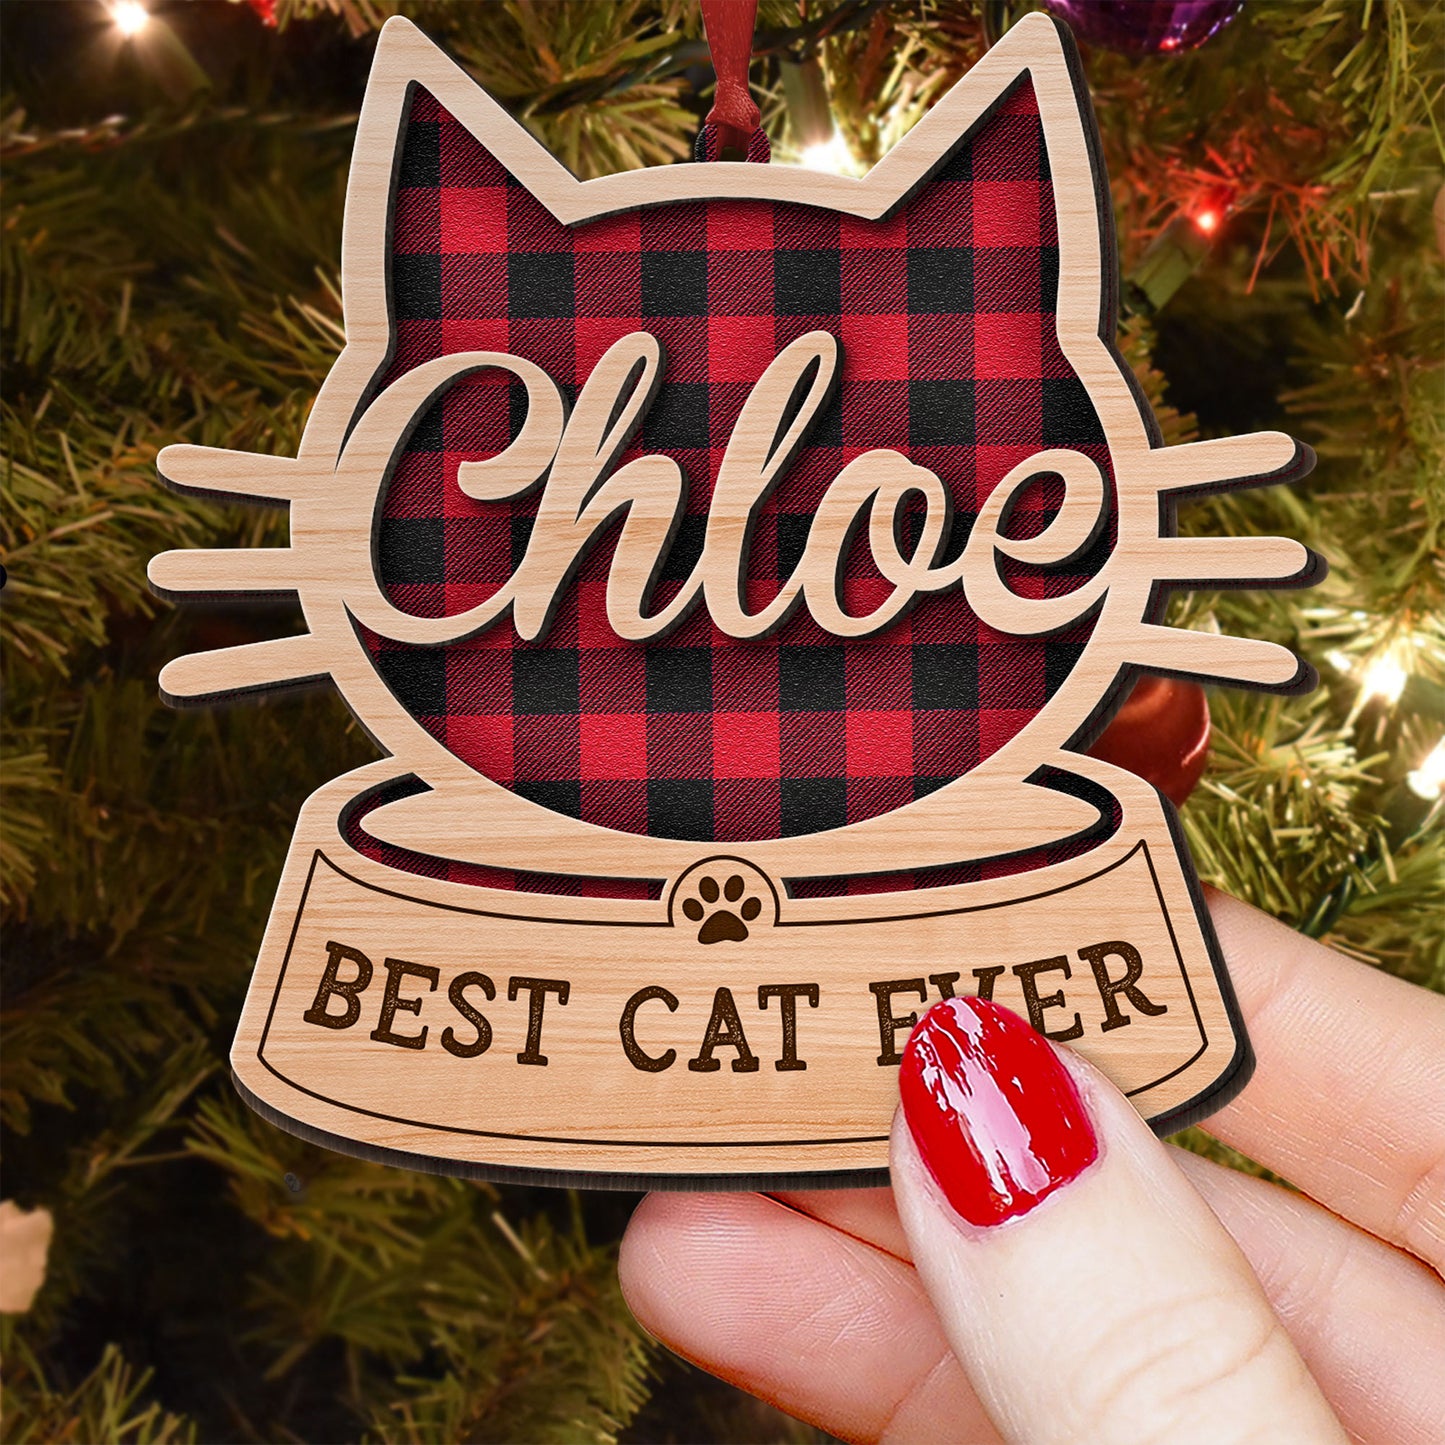 Best Cat Ever - Personalized 2-Layered Wooden Ornament - Christmas Gift Memorial Ornament For Cat Owners, Cat Lovers